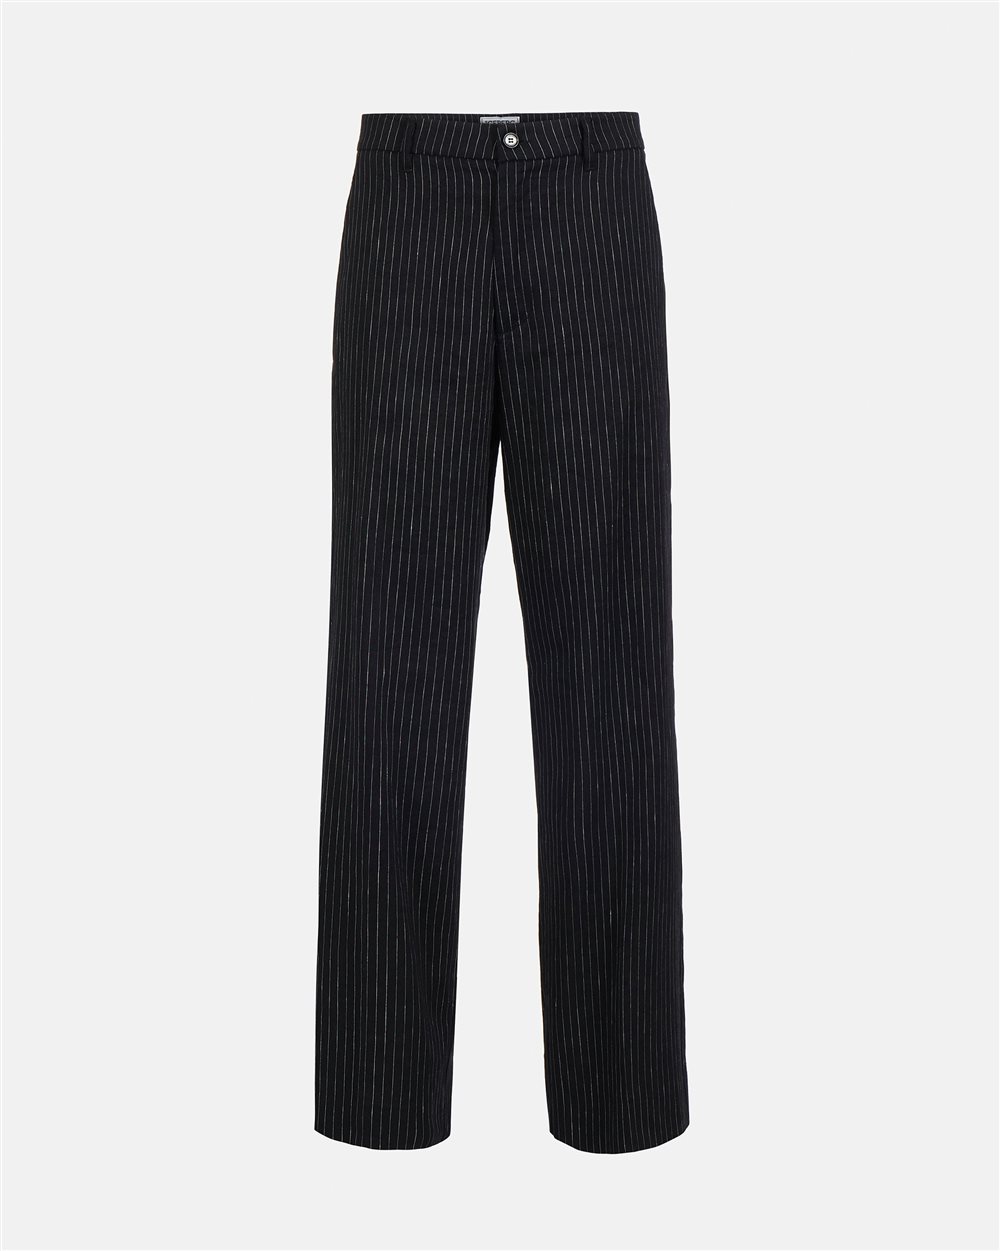 Pinstripe chinos pants - Iceberg - Official Website